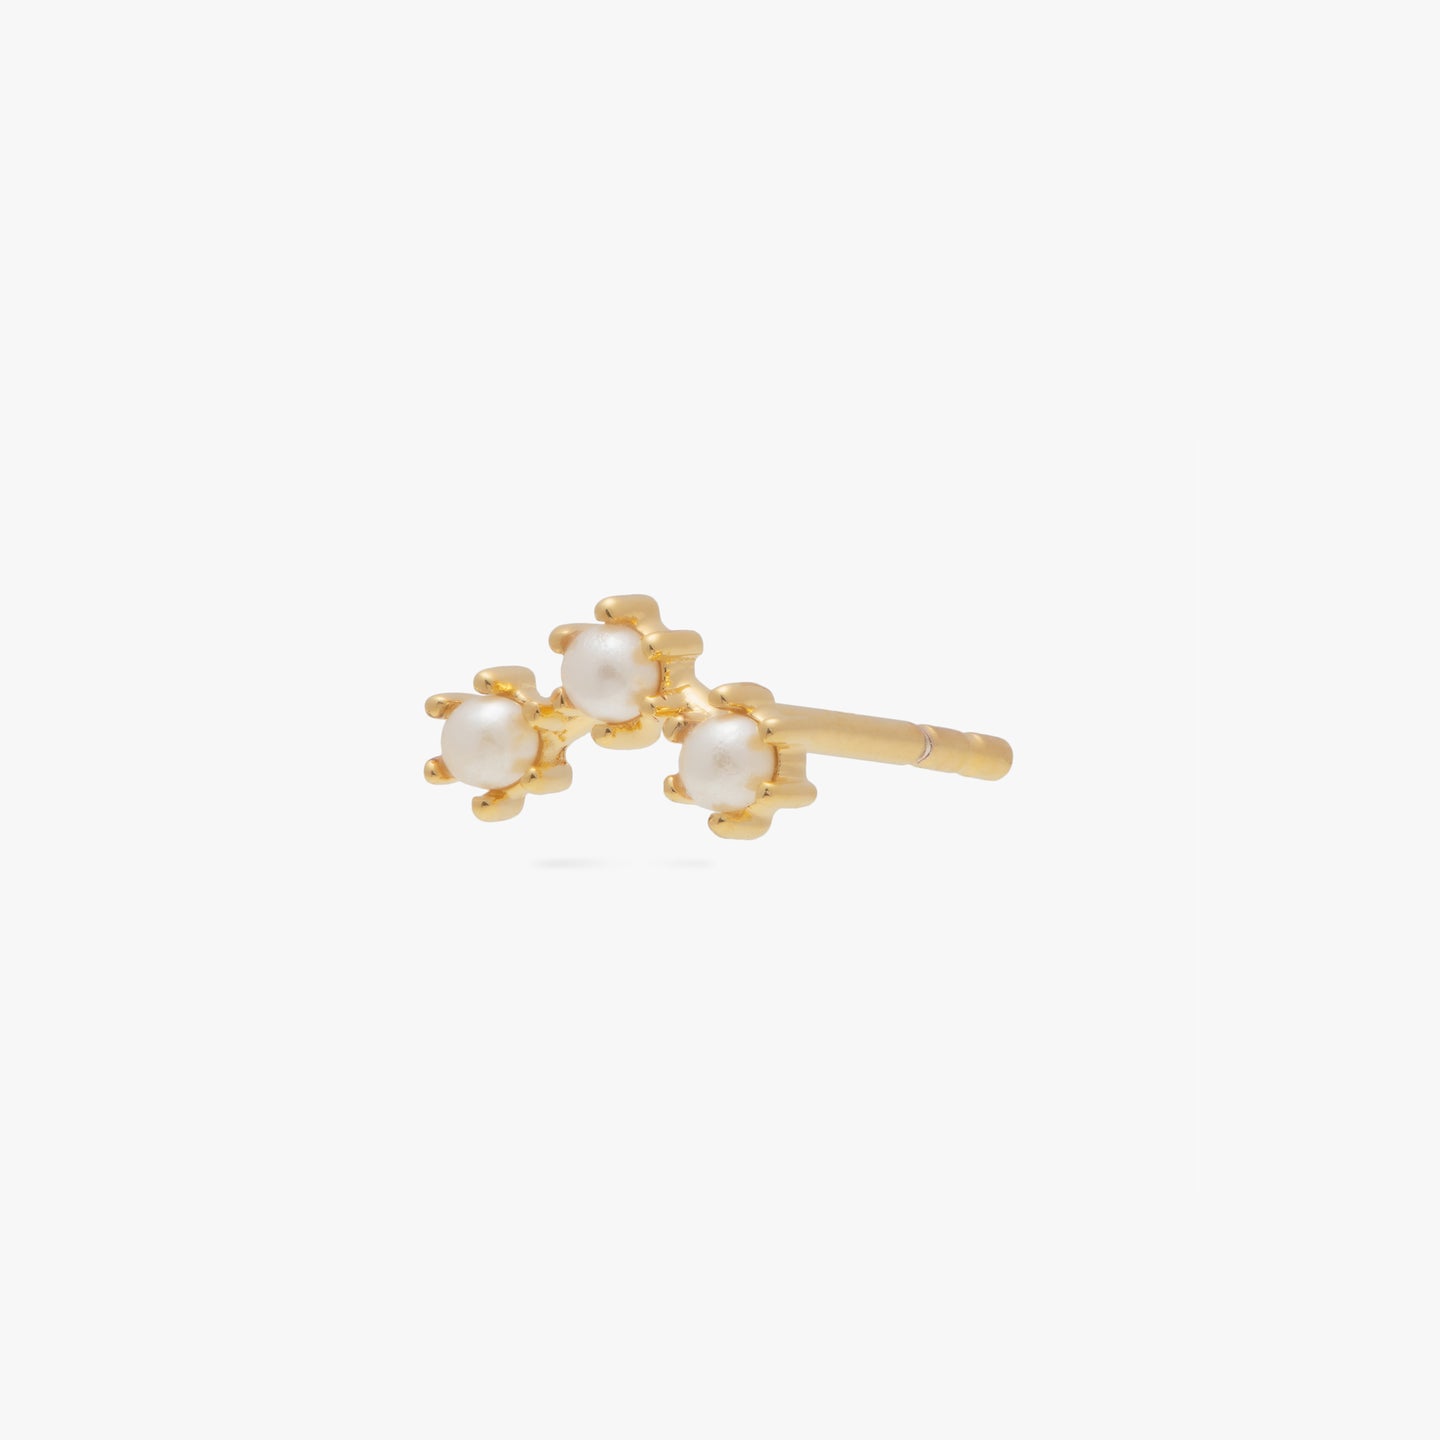 Three pearl studs in an arch shaped cluster color:null|gold